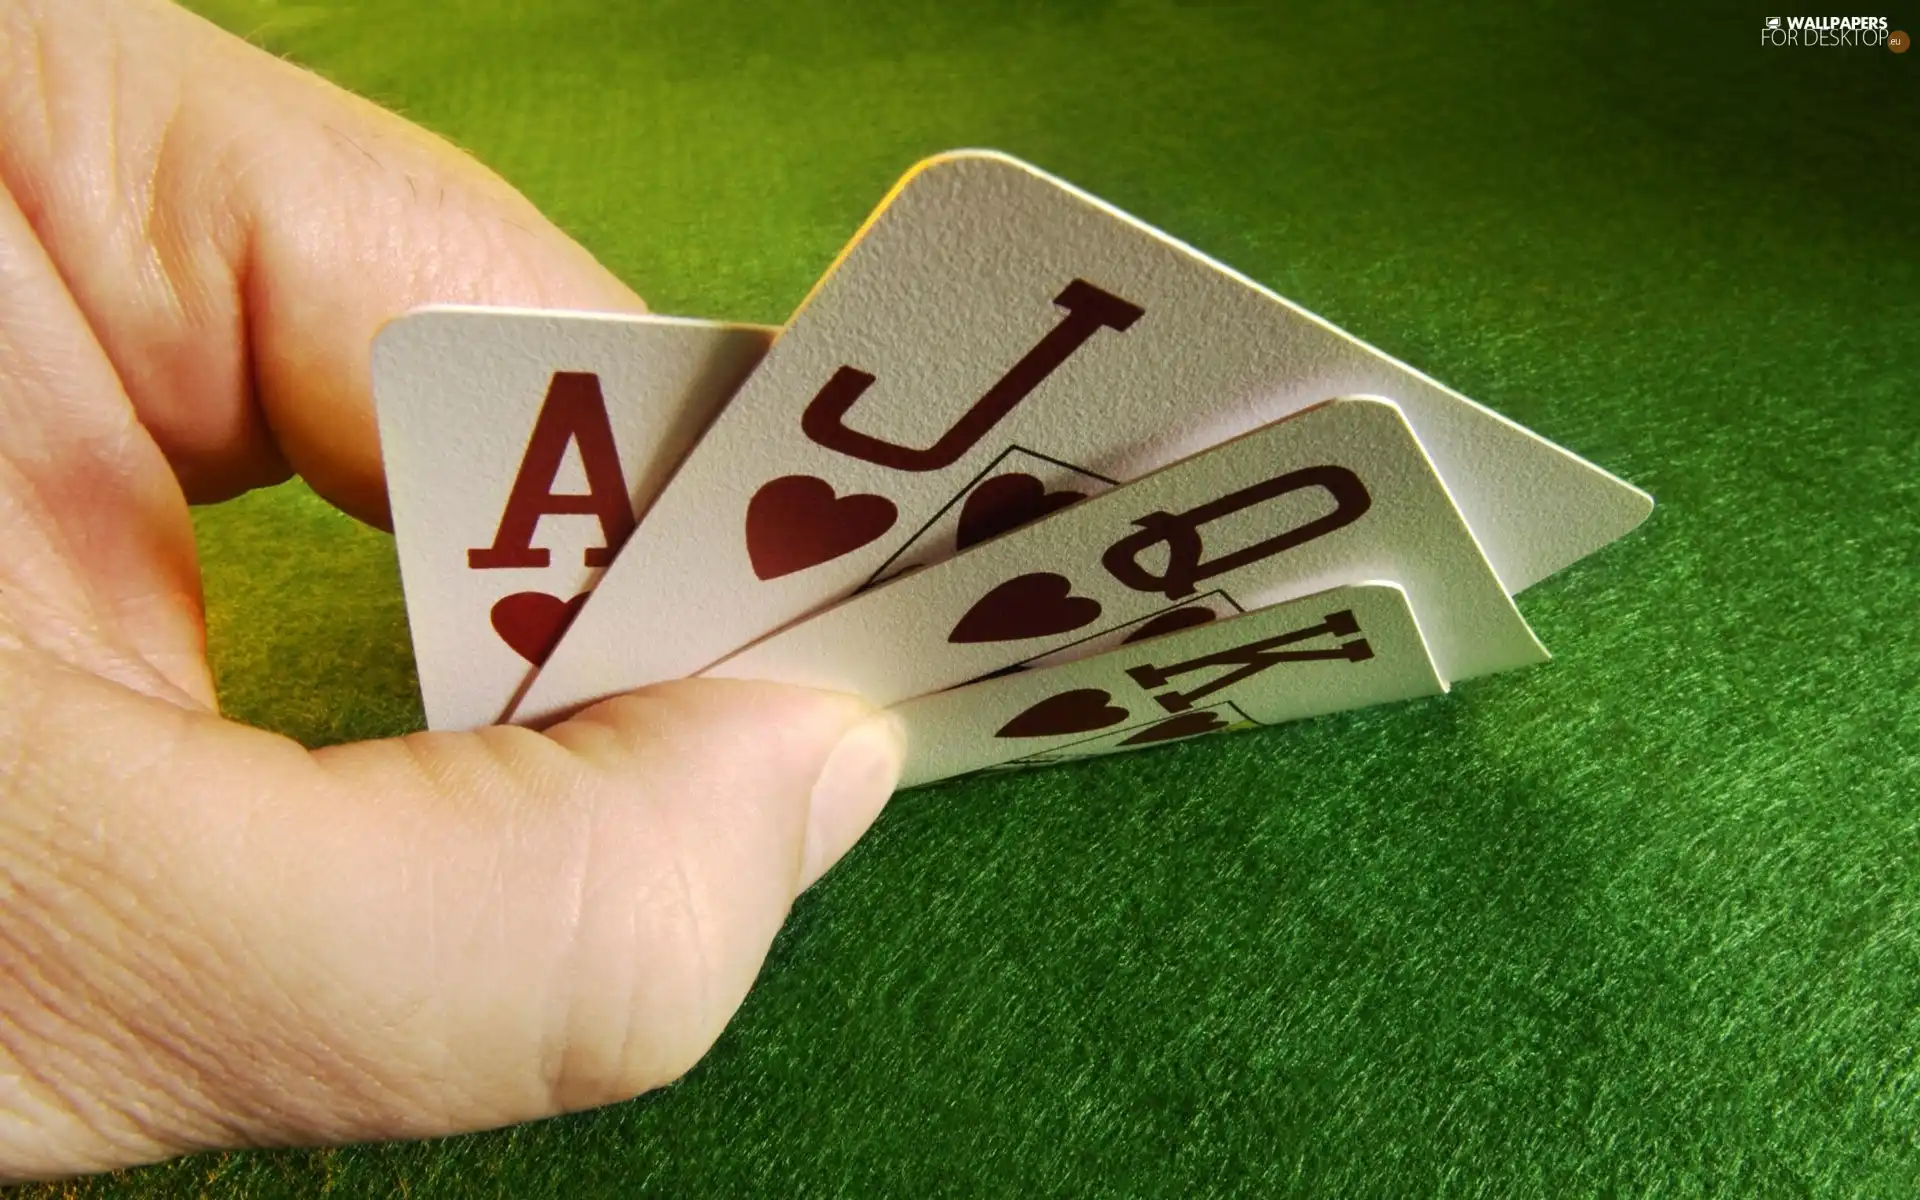 Cards, hand